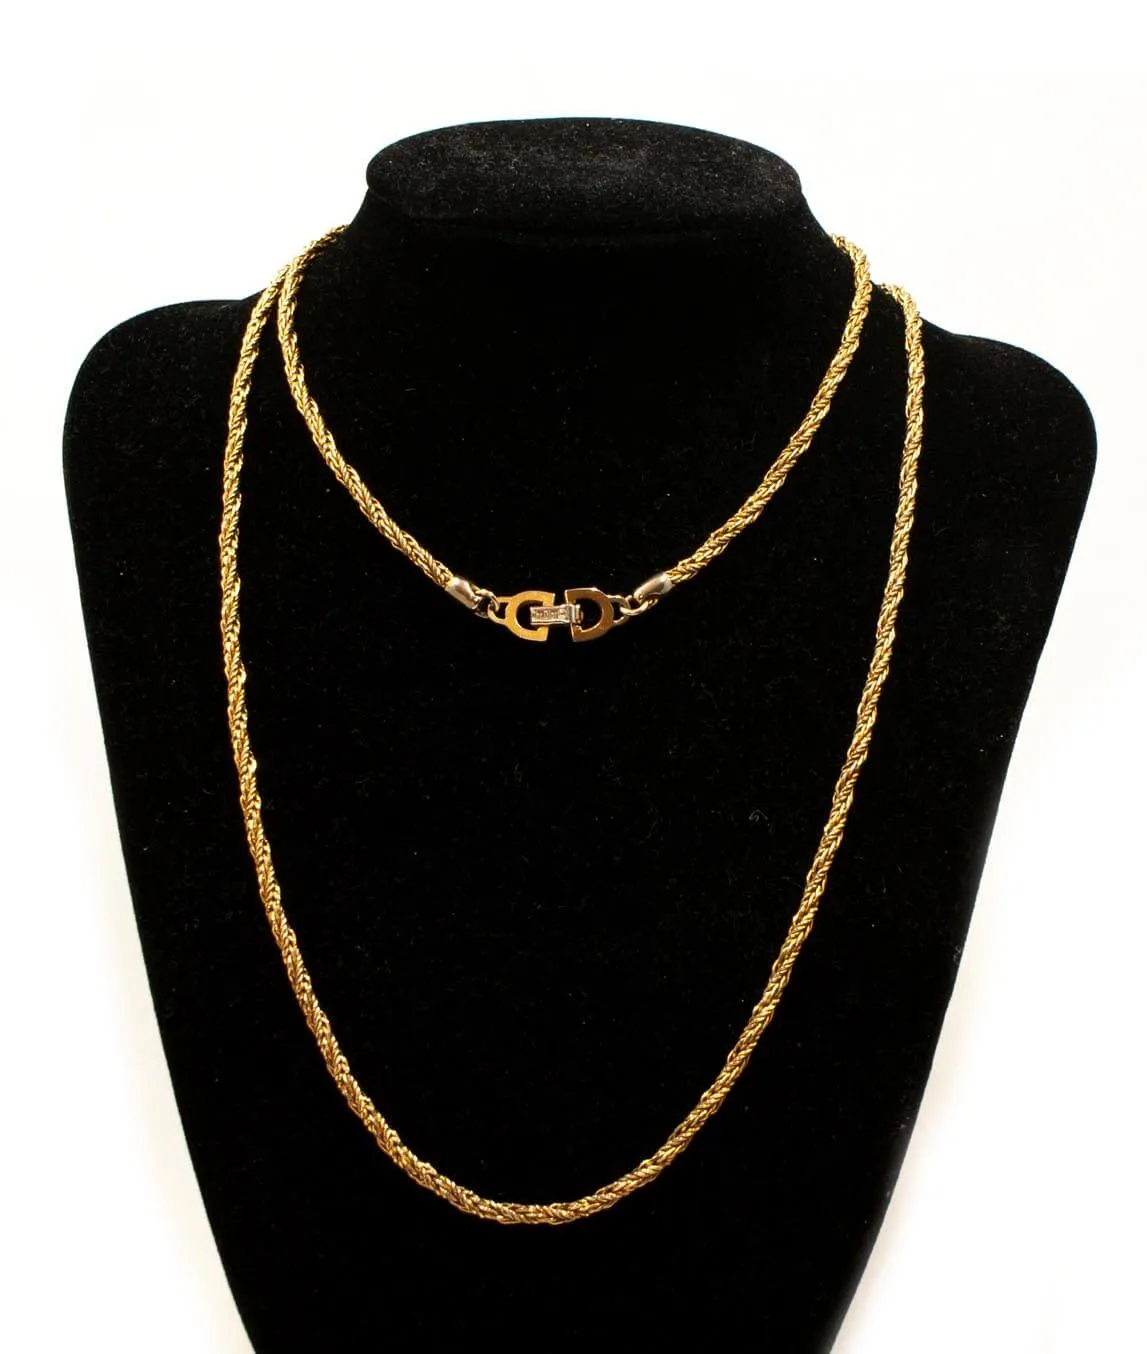 Vintage Dior doubled rope chain